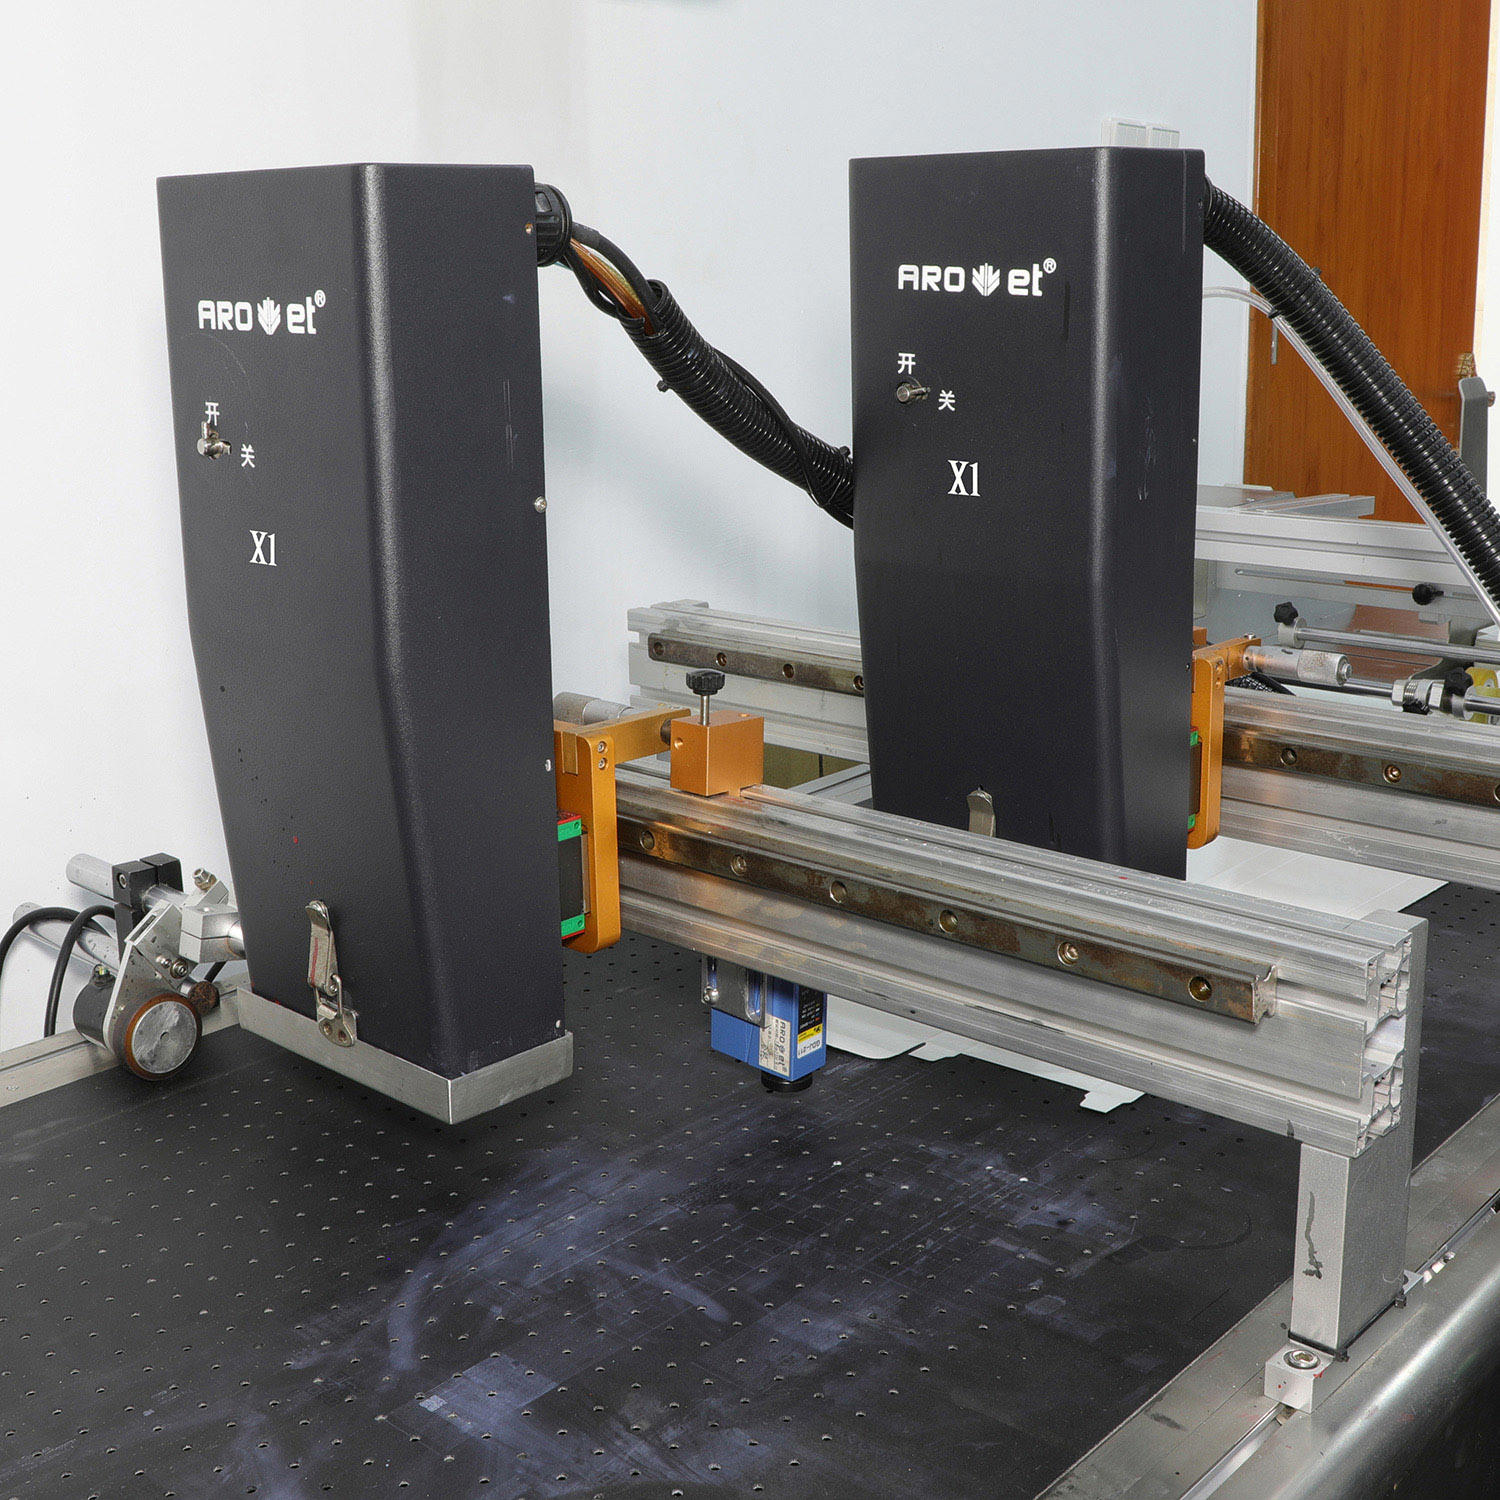 UV LED Ink Curing System Machine for Label Tags Coding